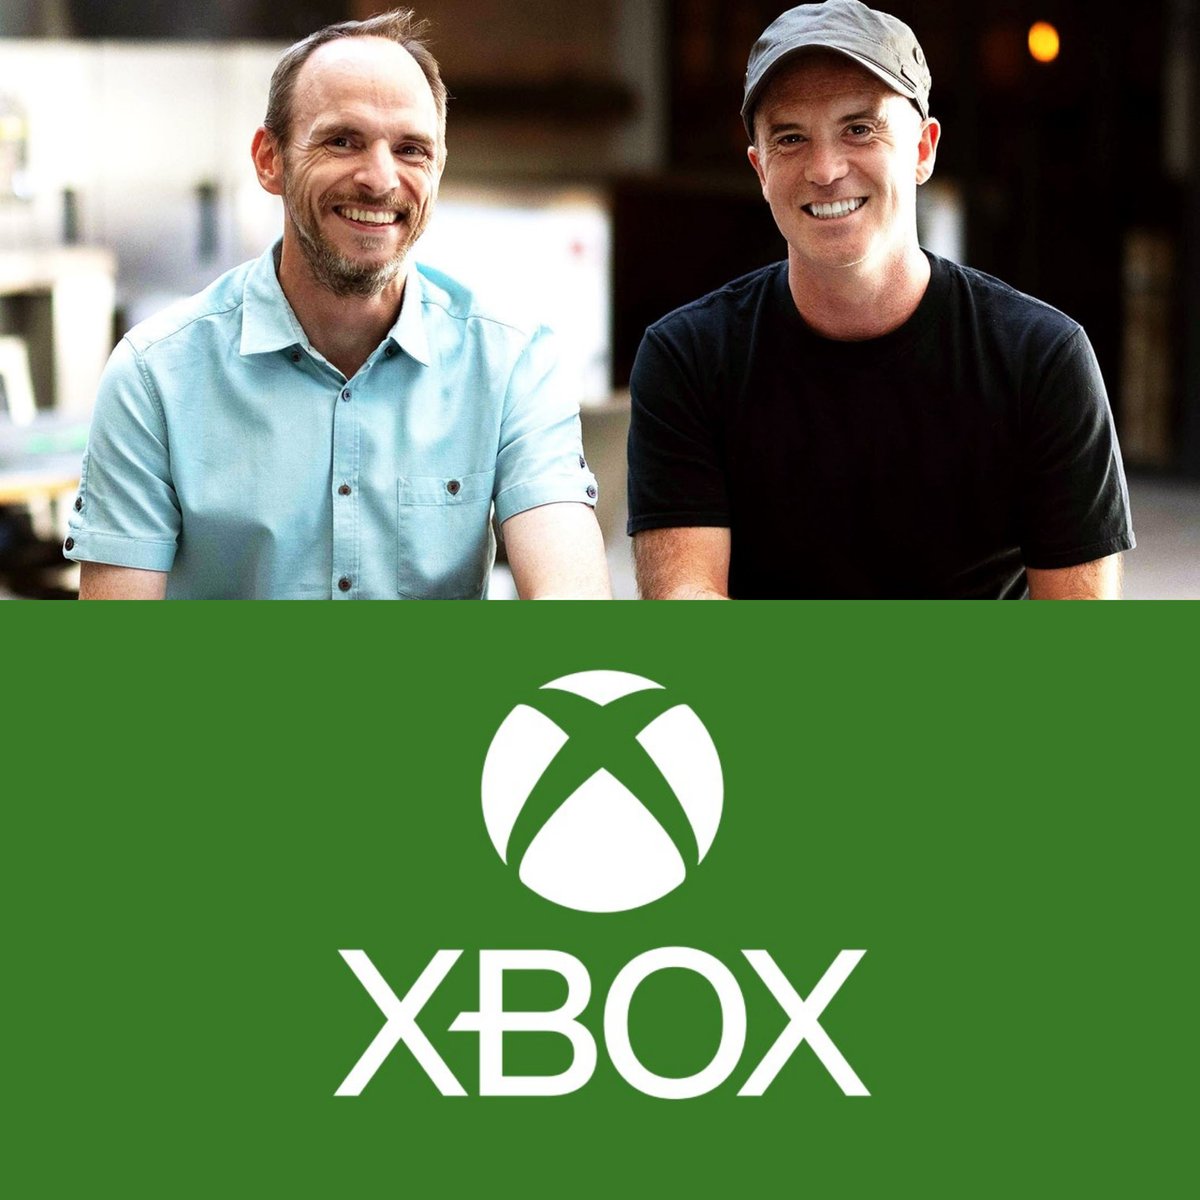 Rumor: Xbox has signed an agreement with the creators of Batman Arkham to fund the debut title from their new studio Hundred Star.

• Studio created by Rocksteady co-founders Sefton Hill and Jamie Walker
• 20+ ex-Rocksteady devs
• AAA, single-player, action-adventure game